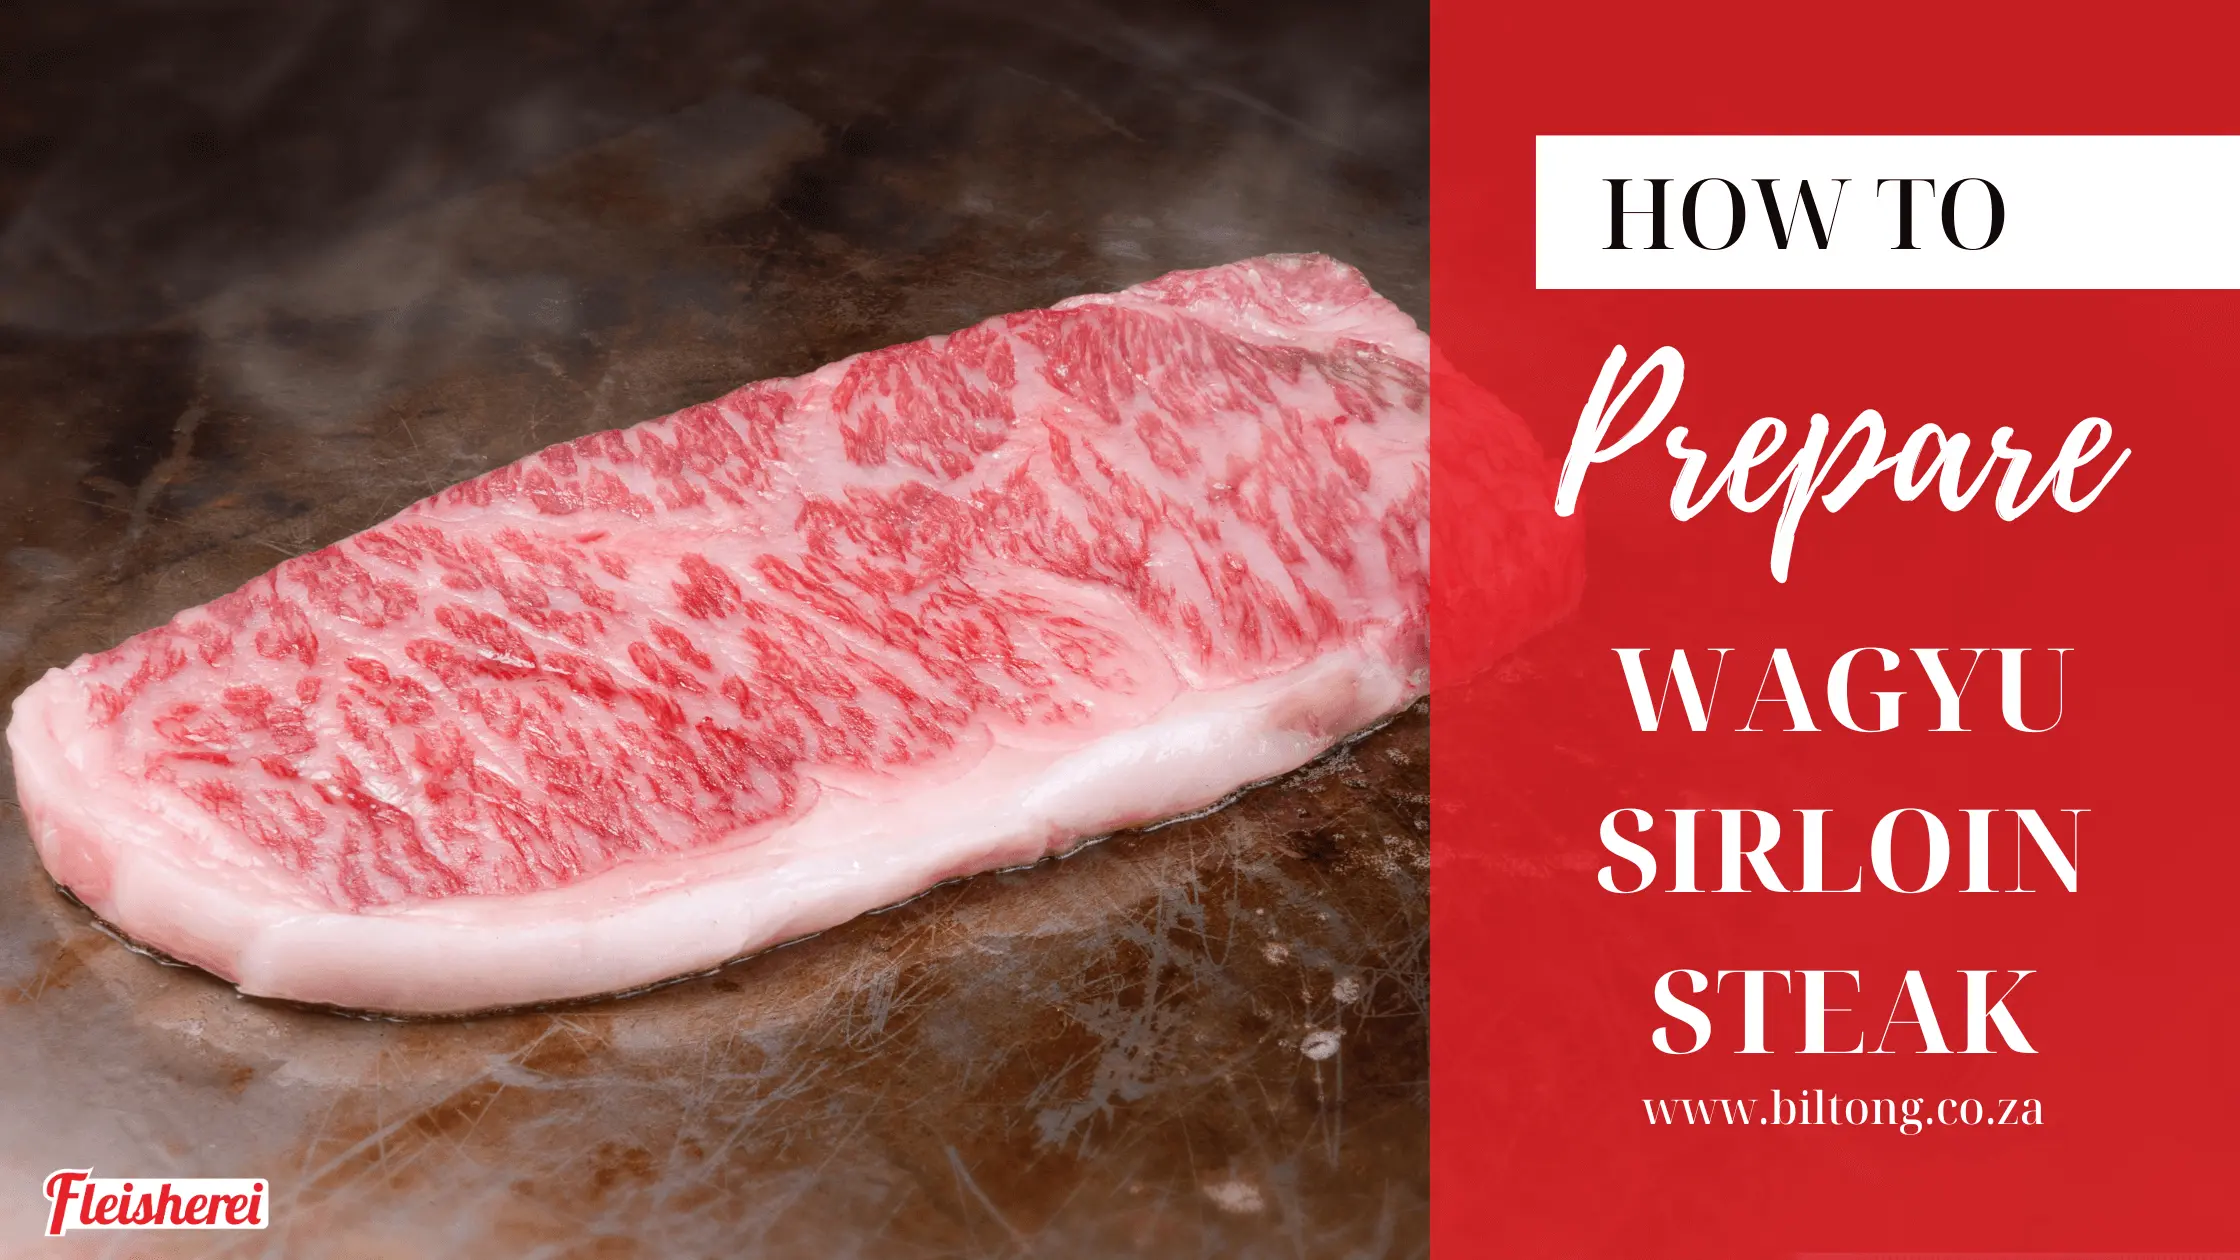 Cooking a Wagyu sirloin steak on the braai is a surefire way to impress your guests with a meal that exudes luxury and exceptional flavor.